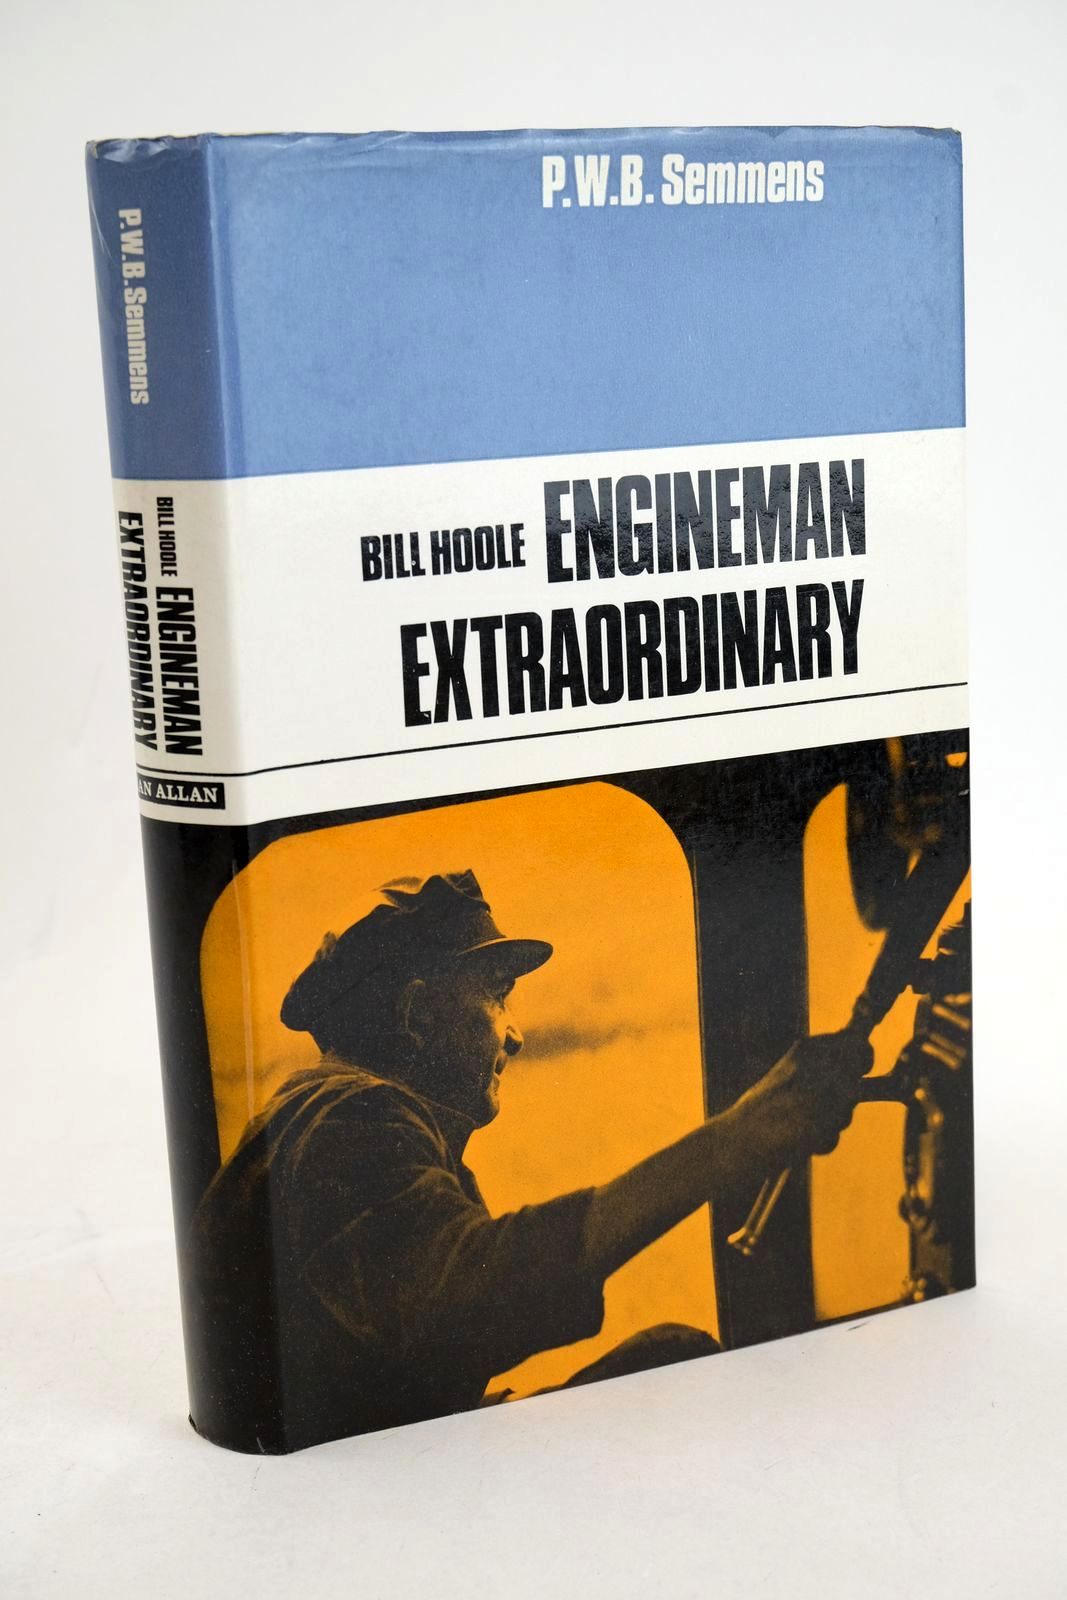 Photo of BILL HOOLE: ENGINEMAN EXTRAORDINARY written by Semmens, Peter W.B. published by Ian Allan (STOCK CODE: 1327406)  for sale by Stella & Rose's Books